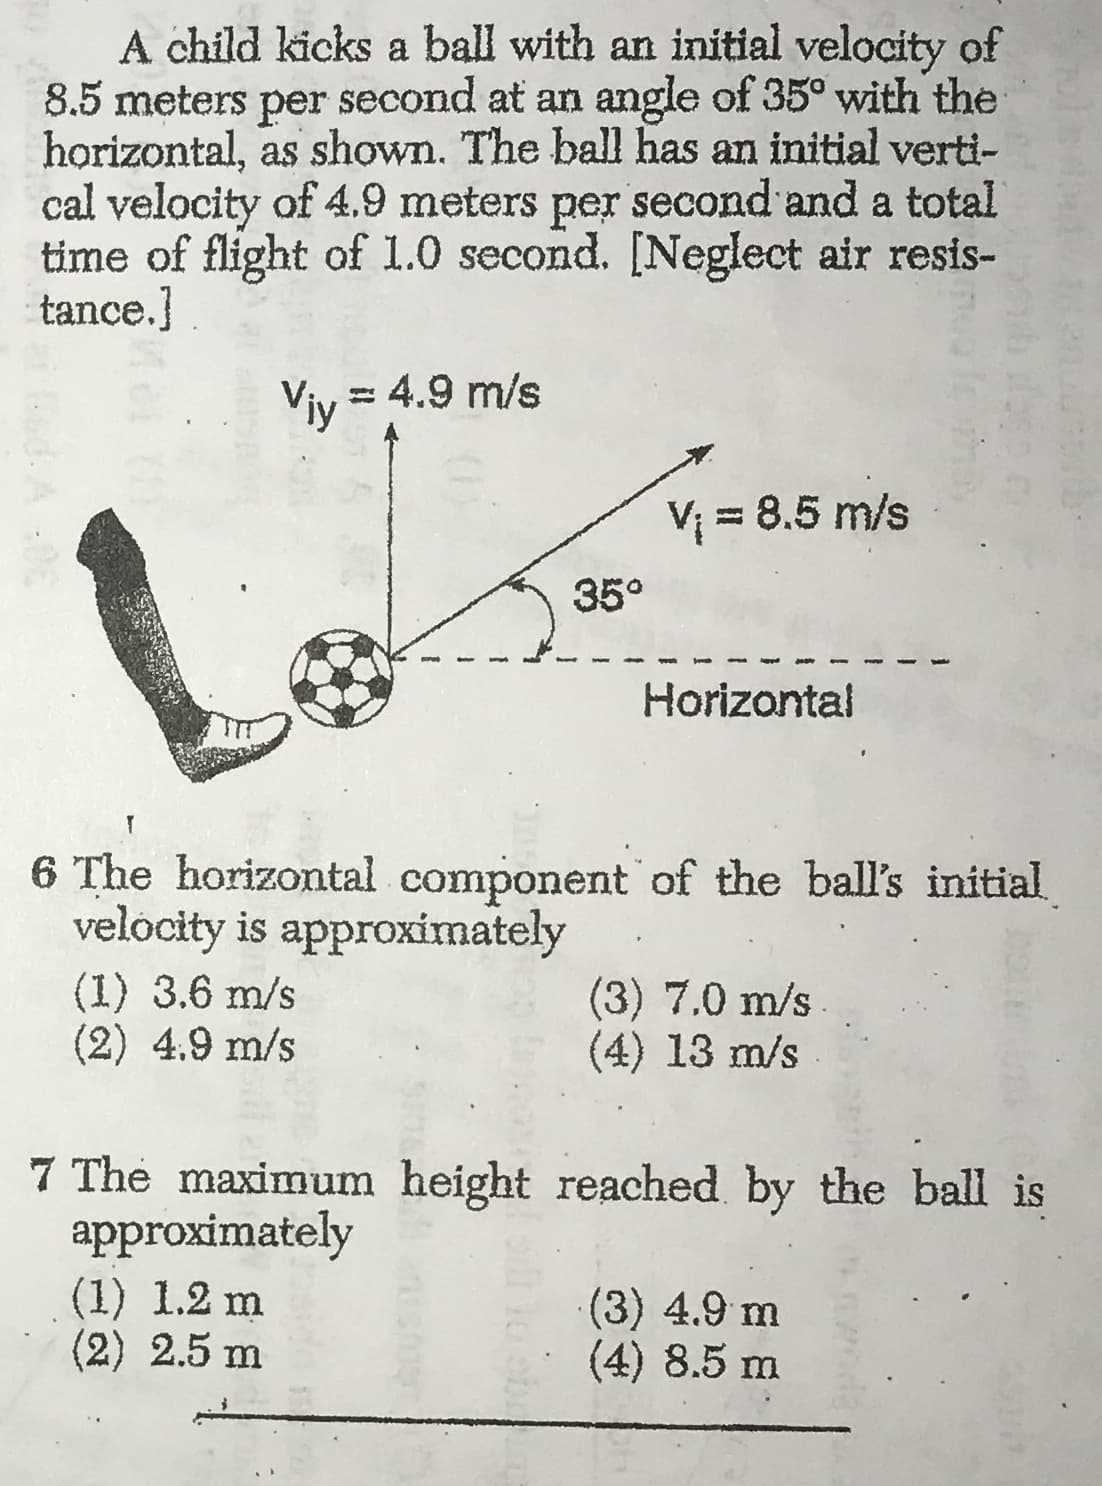 A child kicks a ball with an initial velocity of
8.5 meters
horizontal, as shown. The ball has an initial verti-
cal velocity of 4.9 meters per second and a total
time of flight of 1.0 second. [Neglect air resis-
tance.]
second at an angle of 35° with the
per
Viy 4.9 m/s
V8.5 m/s
35°
Horizontal
T
6 The horizontal component of the ball's initial
velocity is approximately
(1) 3.6 m/s
(2) 4.9 m/s
(3) 7.0 m/s
(4) 13 m/s
7 The maximum height reached by the ball is
approximately
(1) 1.2 m
(2) 2.5 m
(3) 4.9 m
(4) 8.5 m
